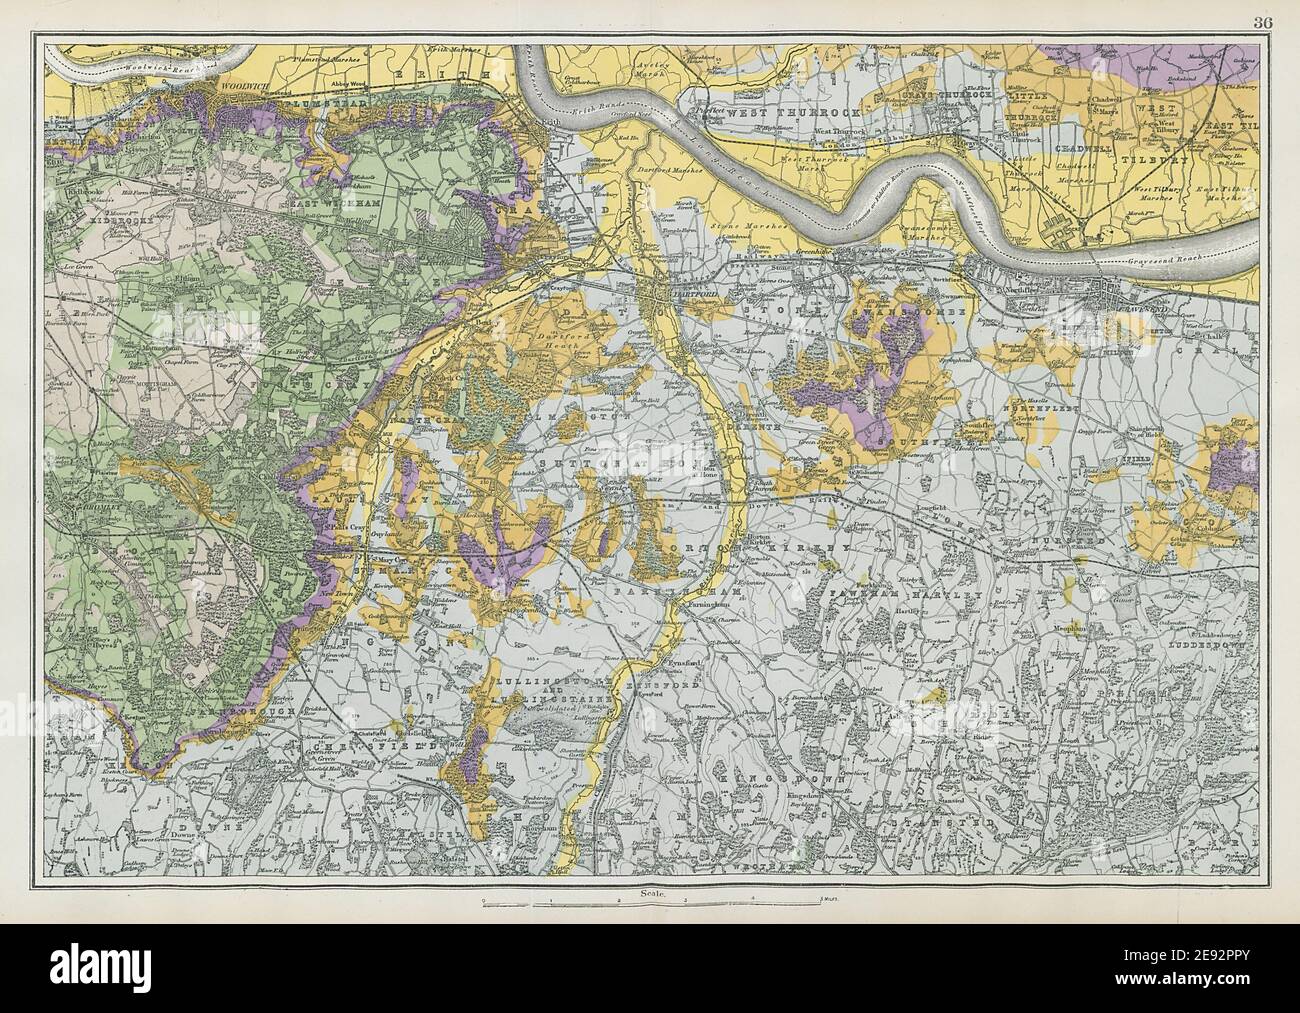 SOUTH EAST LONDON GEOLOGICAL Kent Greenwich Bexley Bromley &c. BACON 1906 map Stock Photo